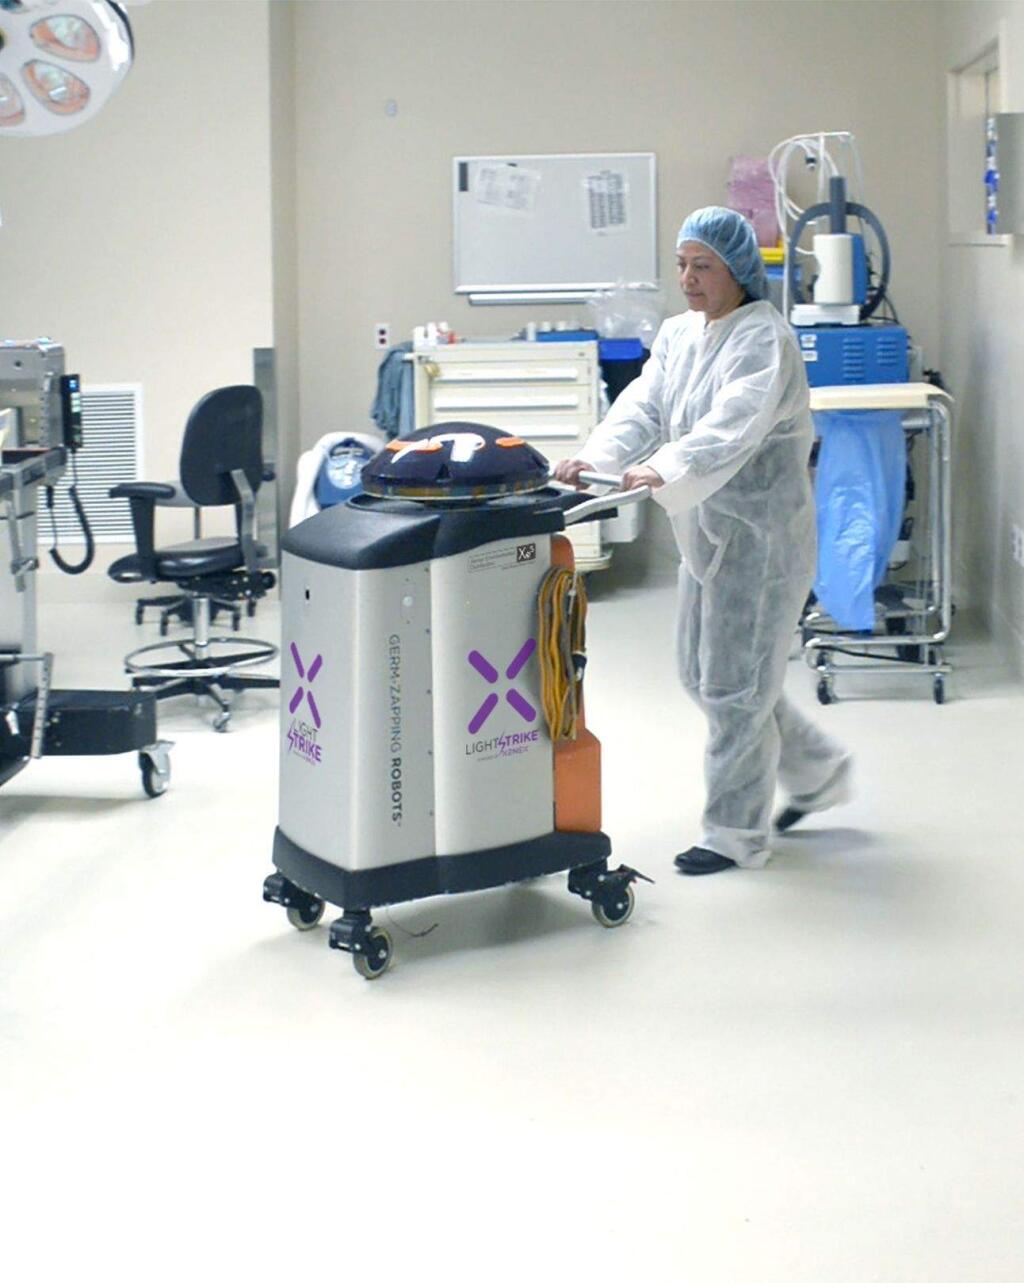 Xenex LightStrike Germ-Zapping Robot disinfects hosptial rooms. Marin General Hospital and Sonoma Valley Hospital are using the robots in 2016. (Xenex)